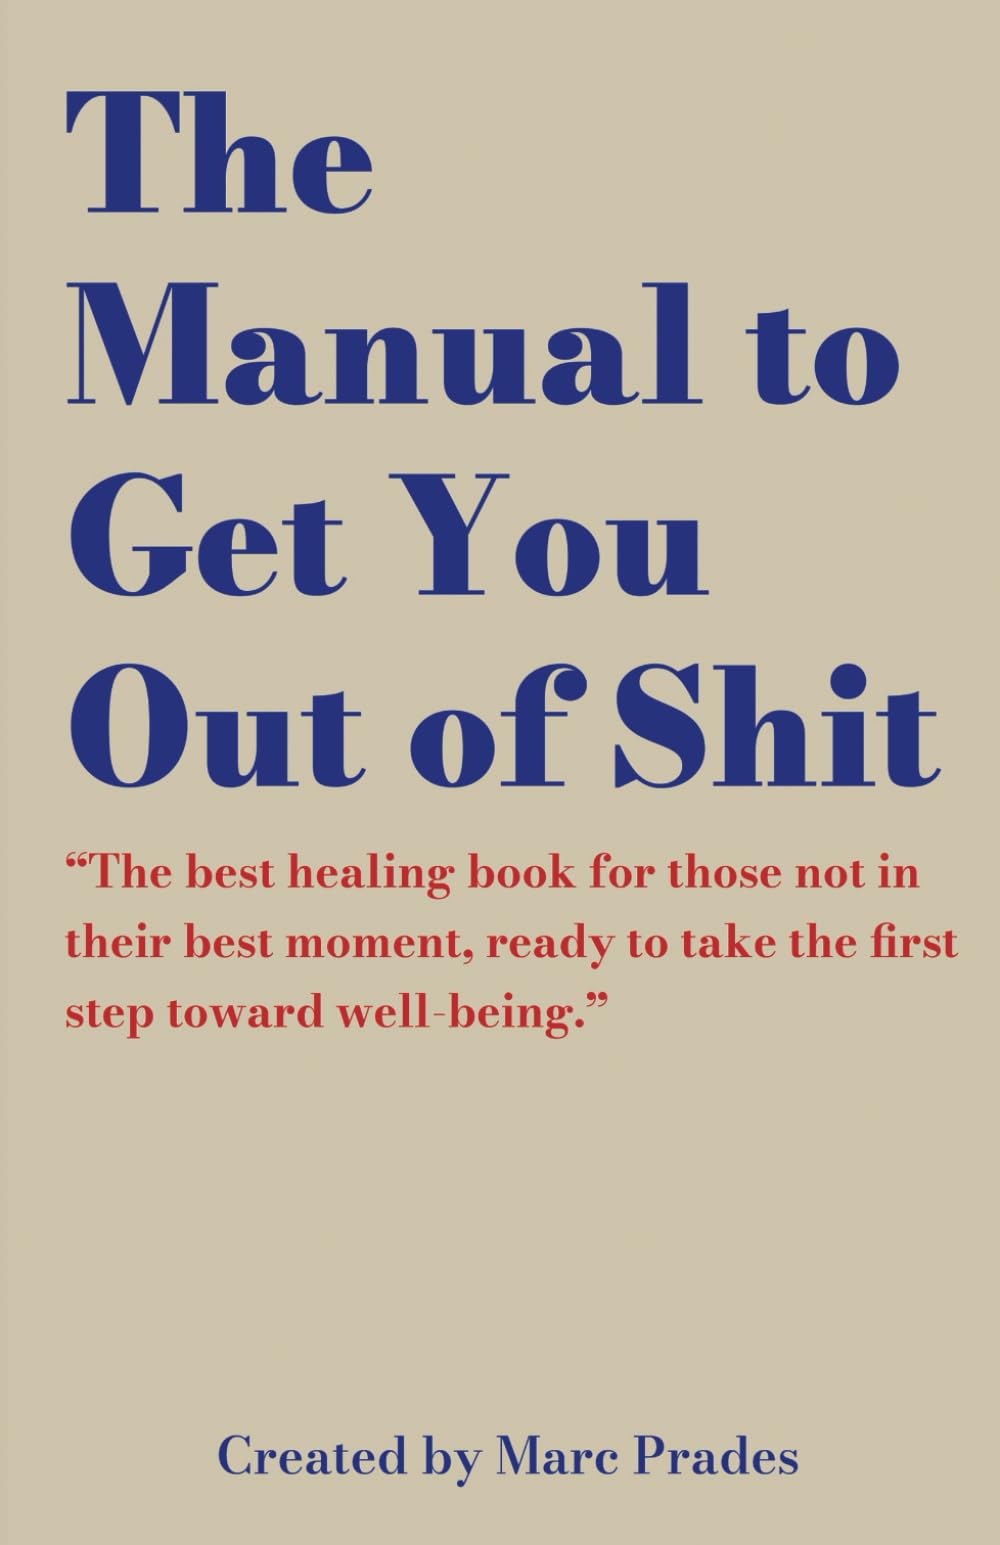 The Manual to Get You Out of Shit: A Guided Healing Journal with Prompts